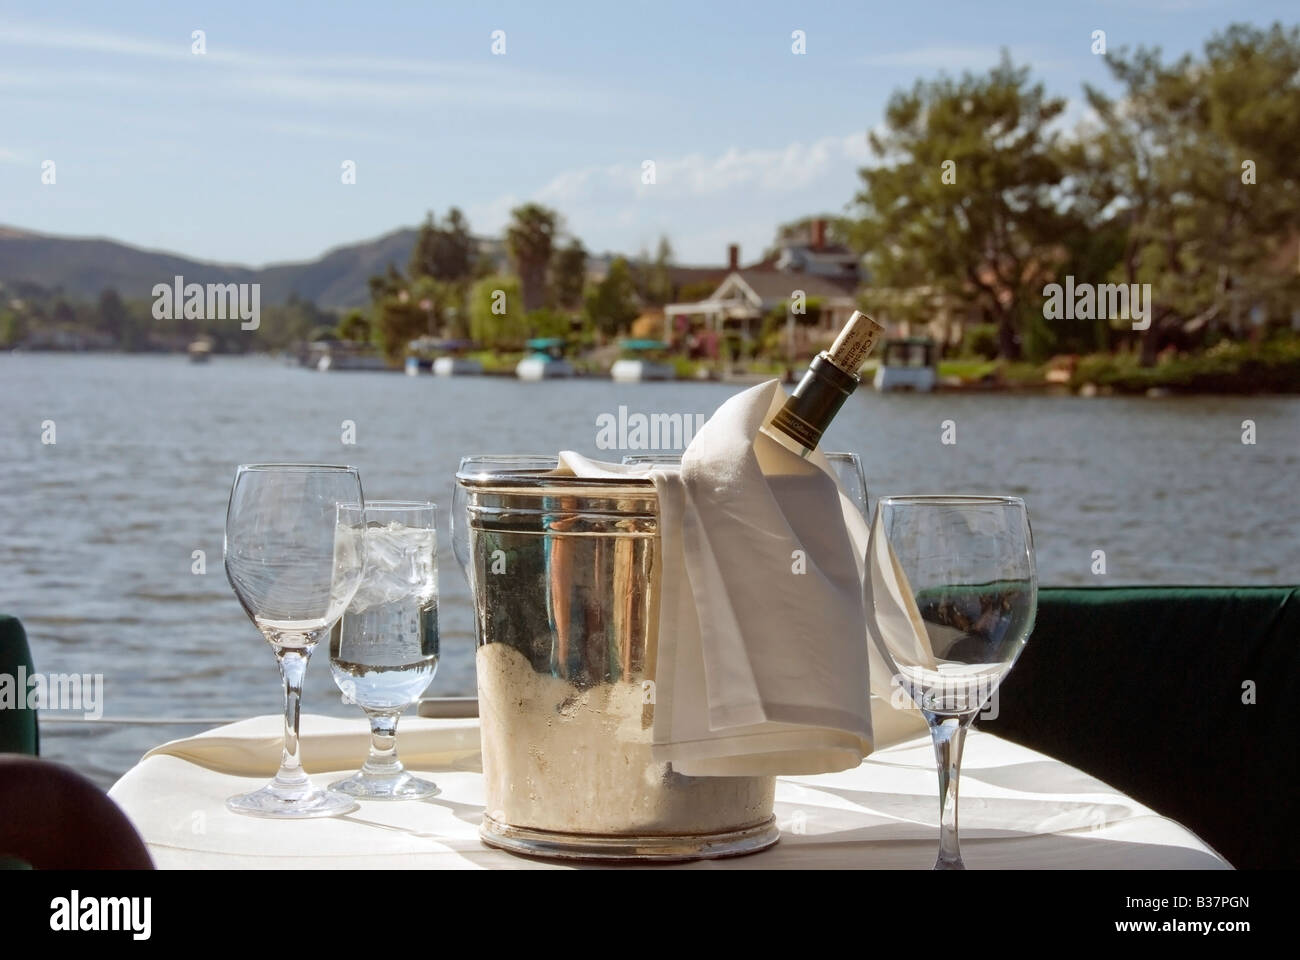 Enjoying wine on boat in Exclusive community Houses, Homes along Lake in Westlake Village, los angeles county, California, elite Stock Photo